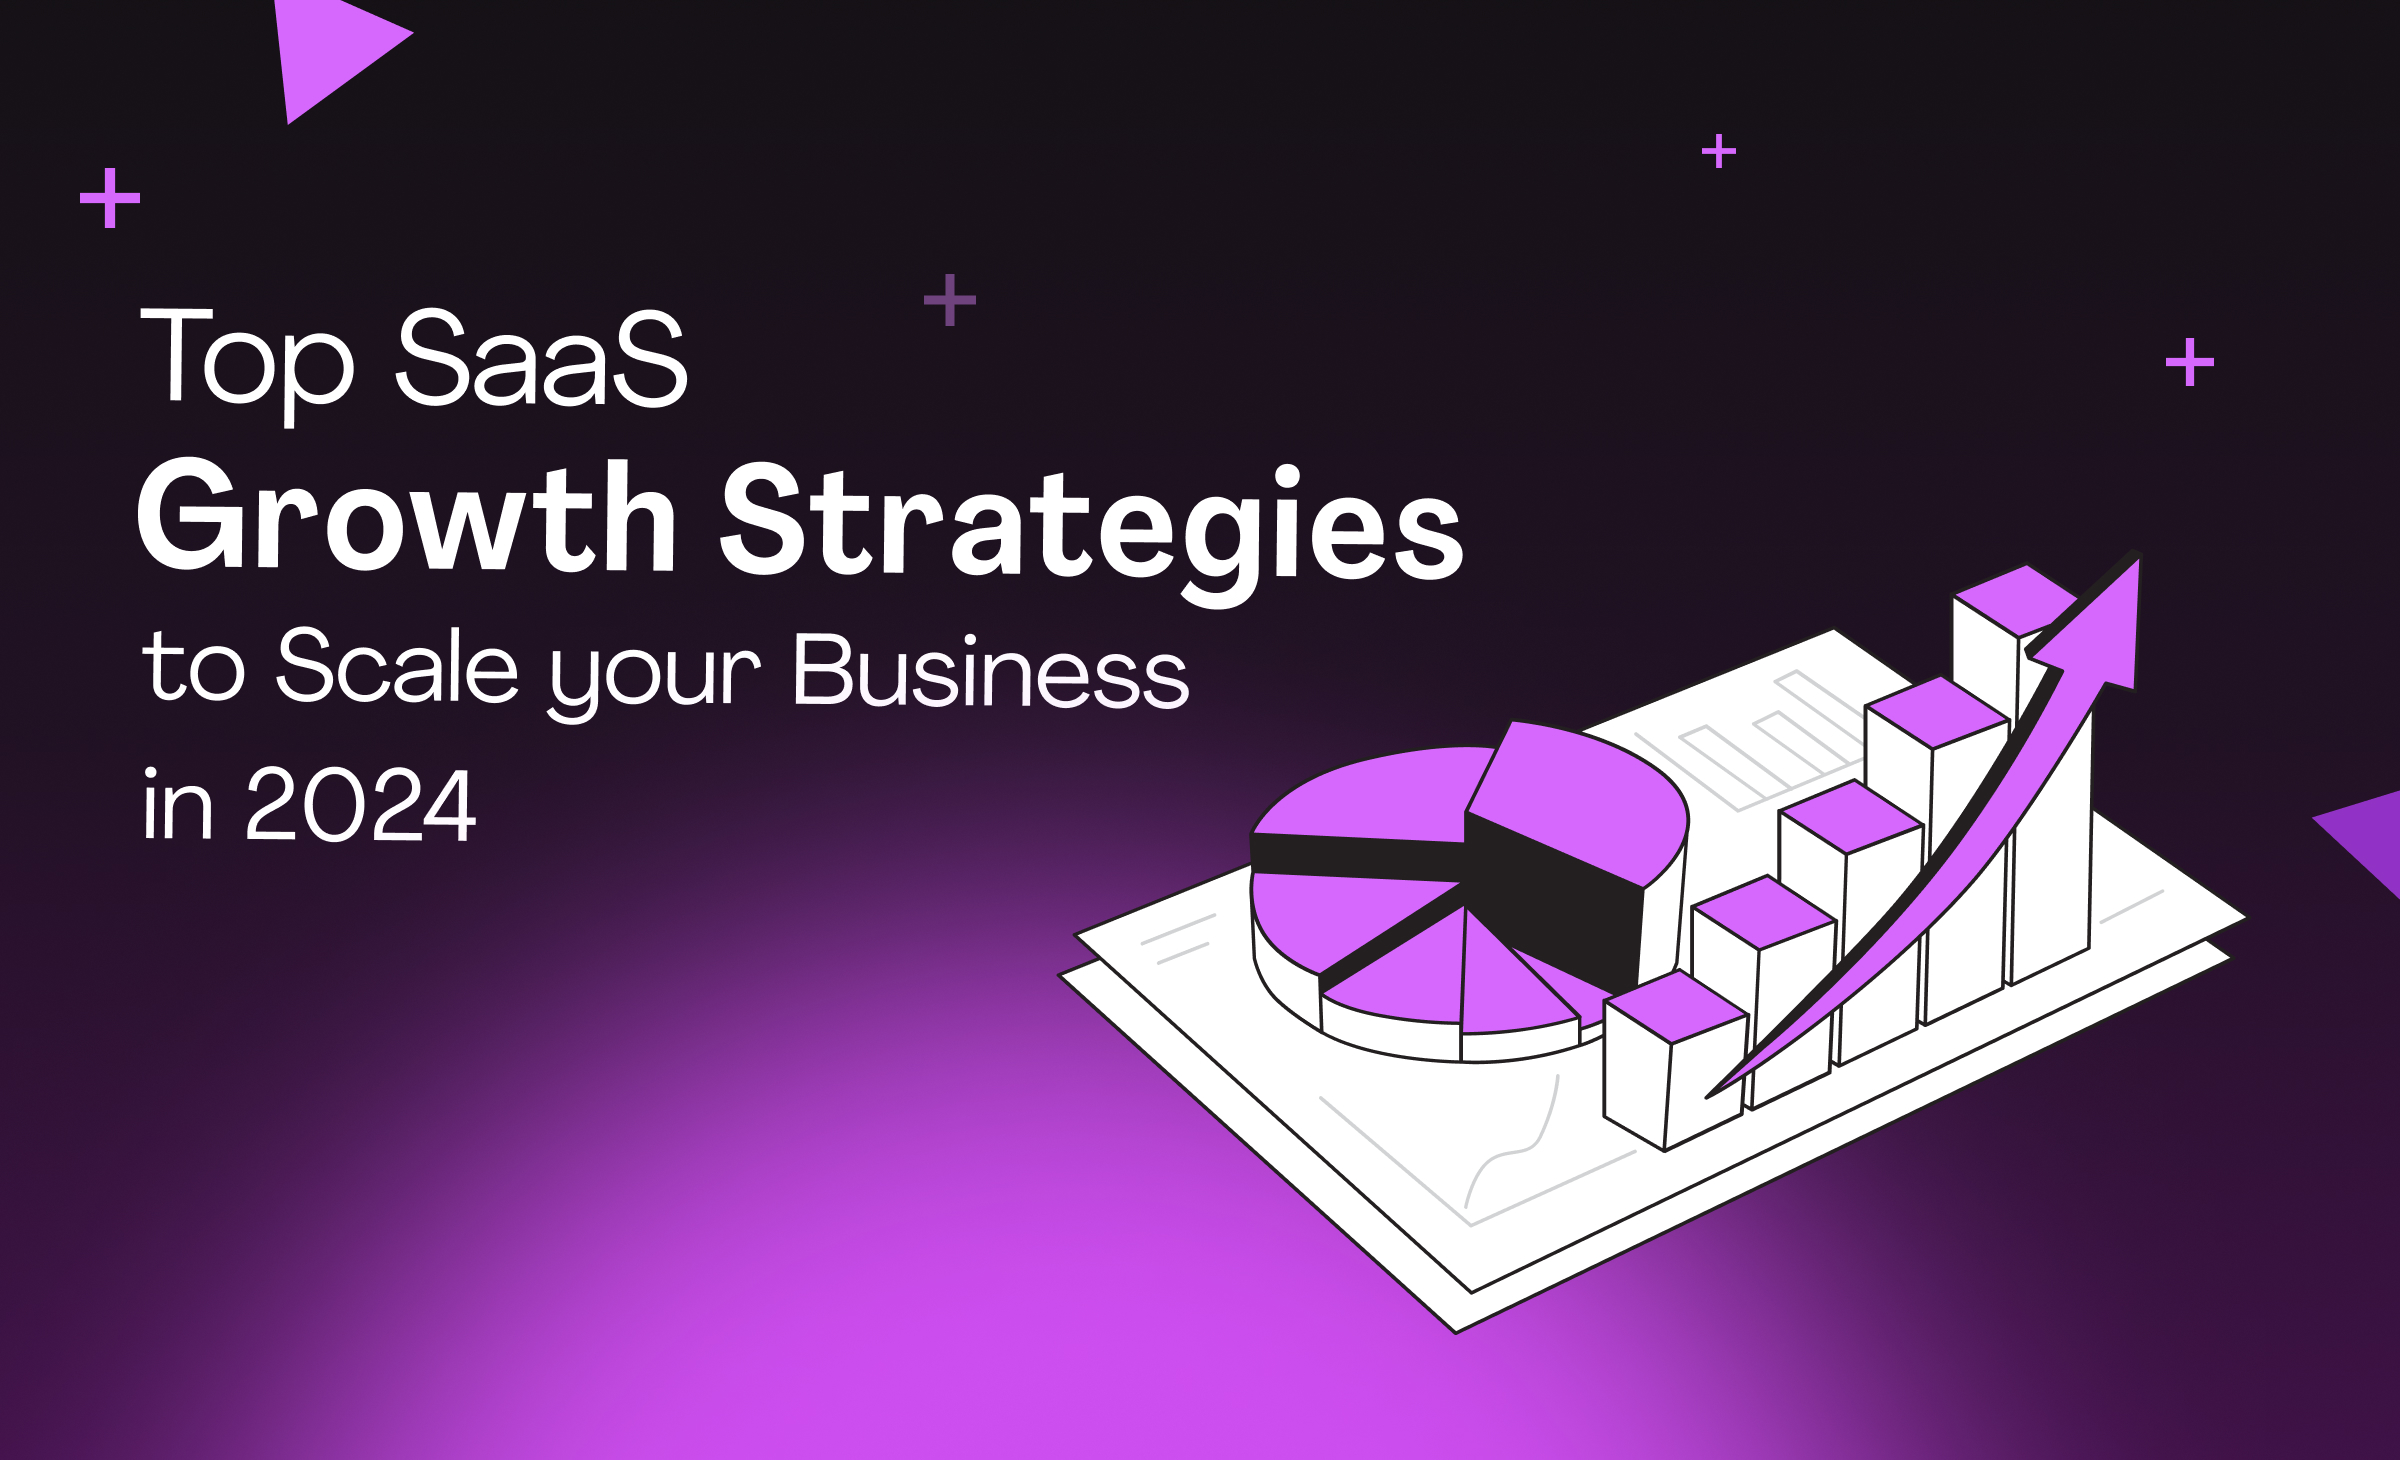 Top SaaS Growth Strategies to Scale Your Business in 2024